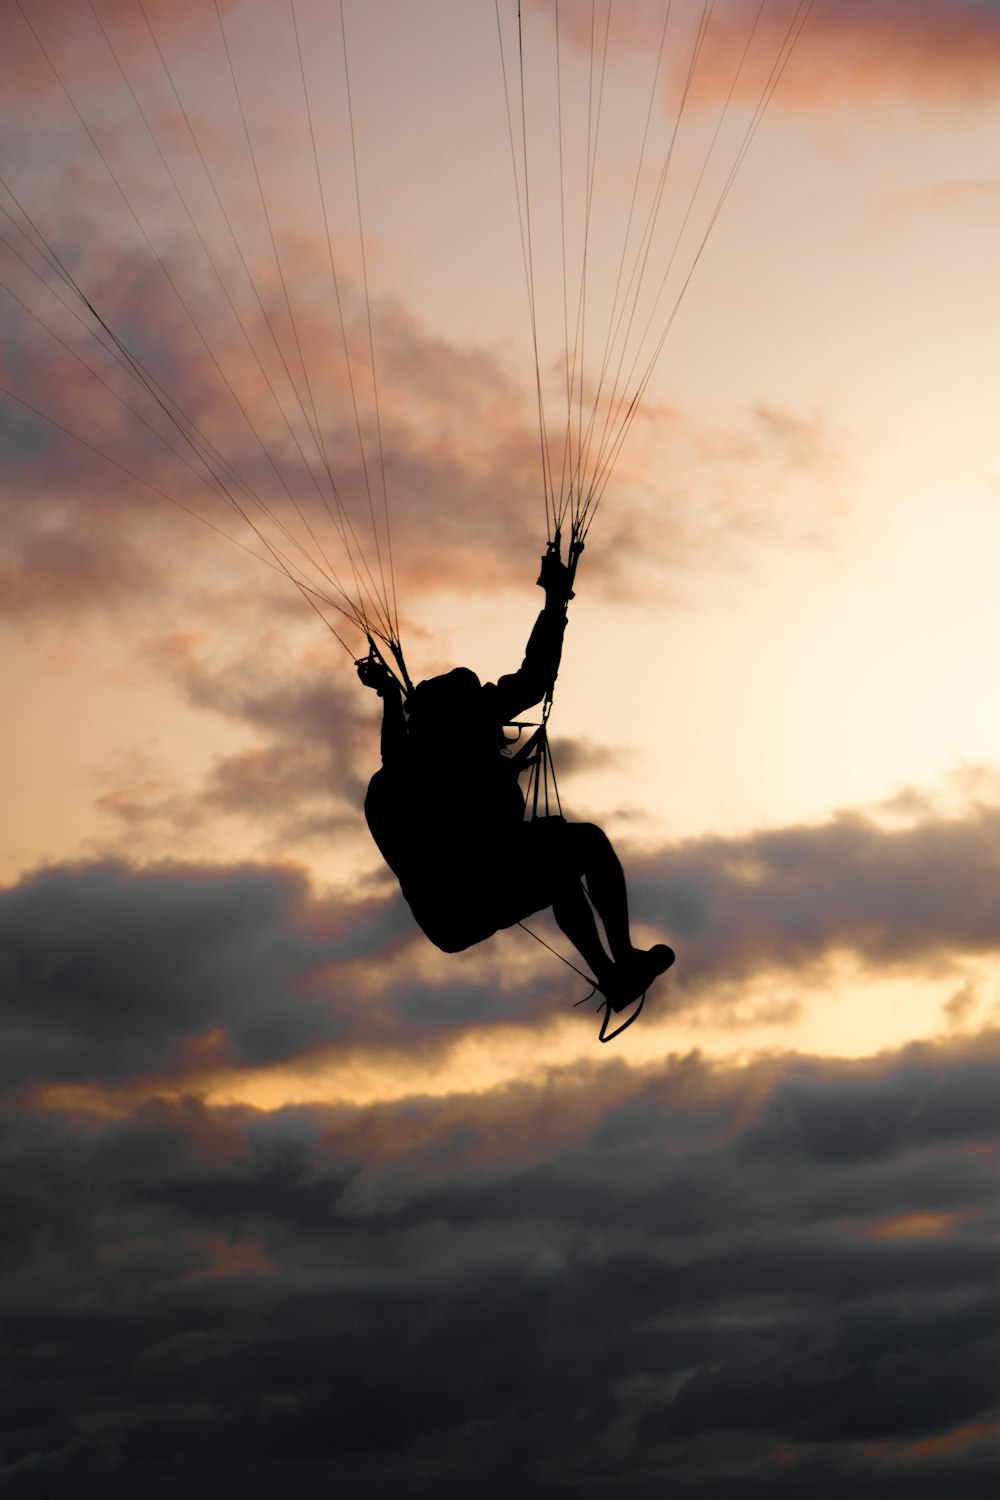 a person is parasailing in the sky at sunset